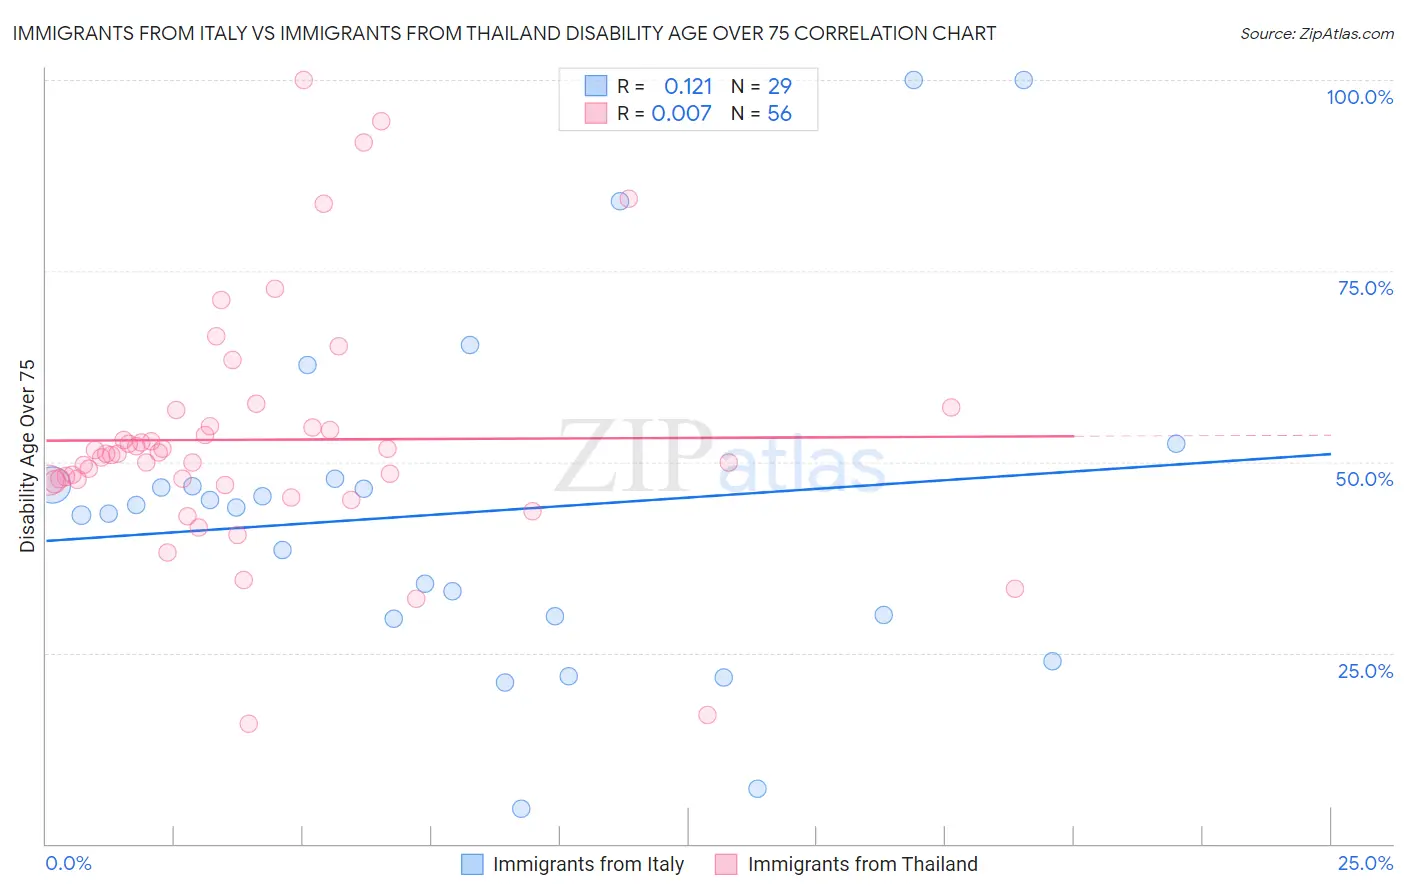 Immigrants from Italy vs Immigrants from Thailand Disability Age Over 75